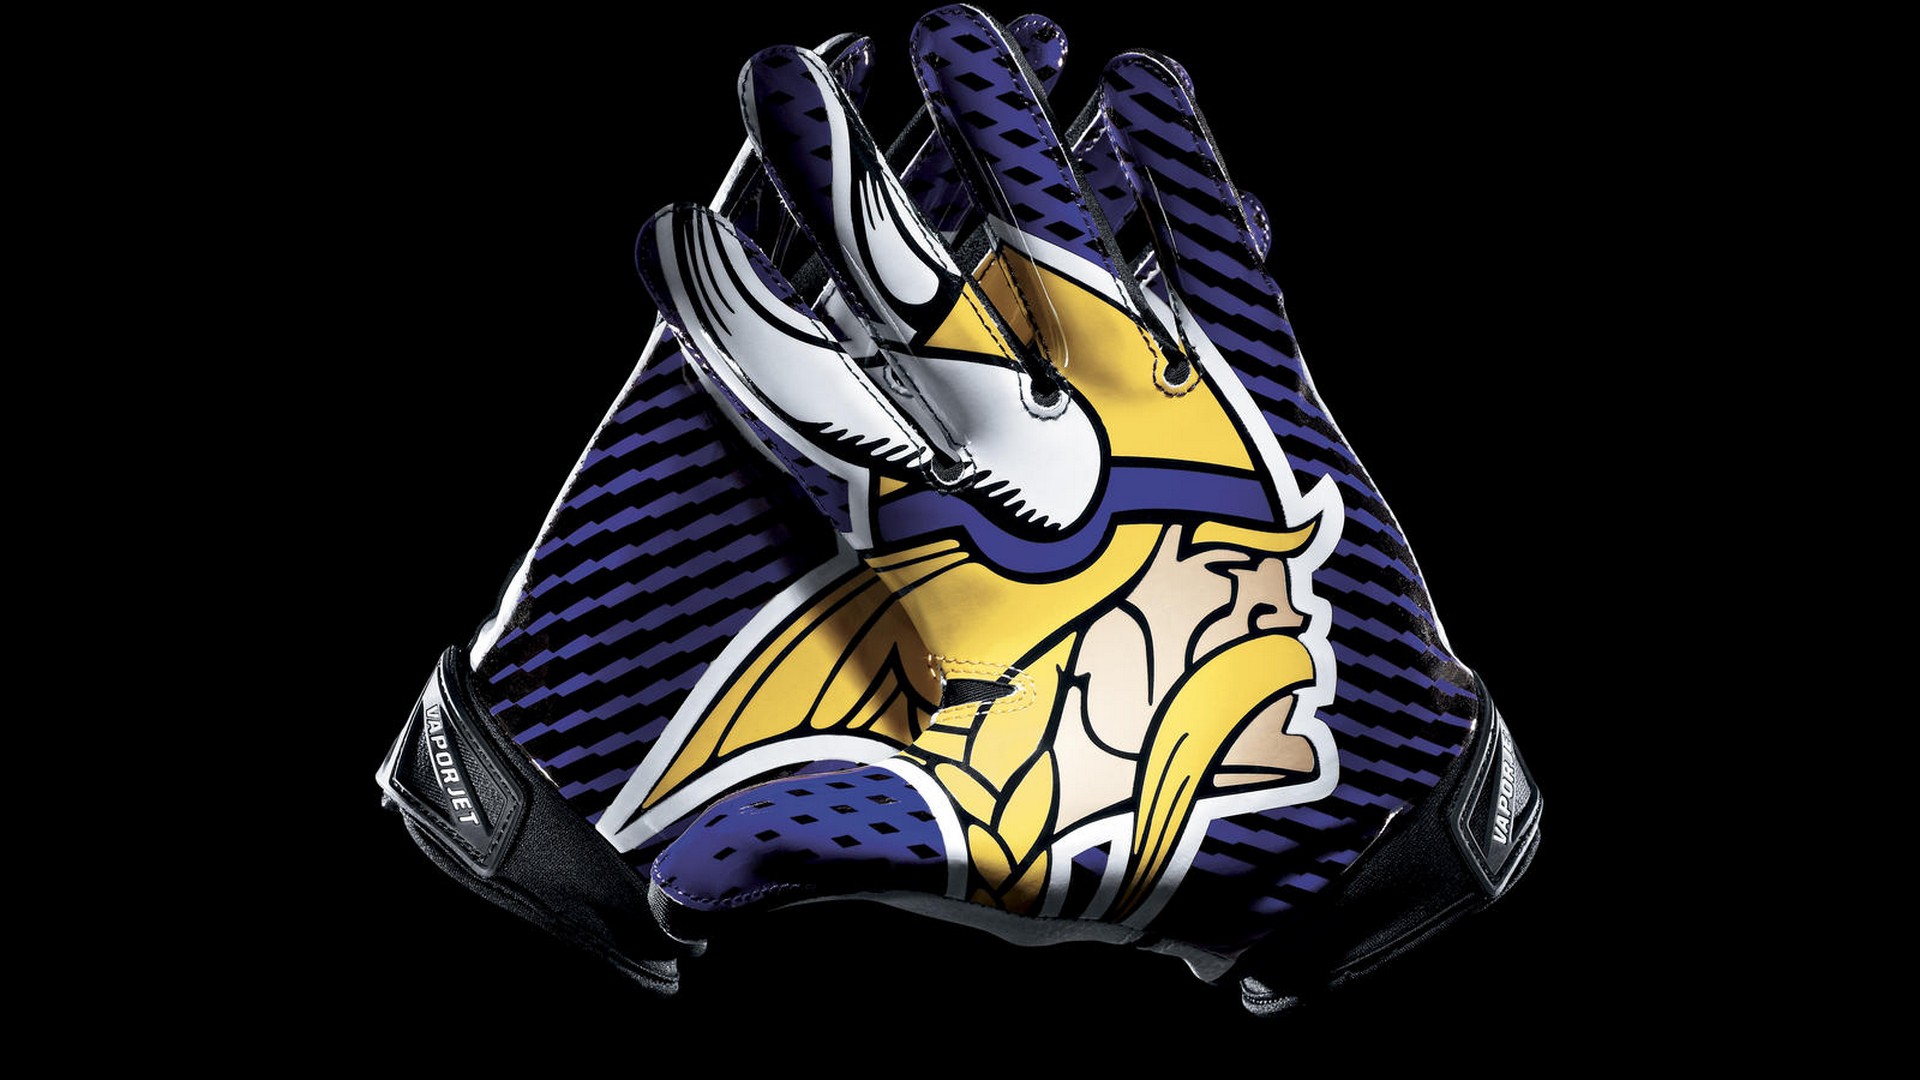 Wallpapers HD Minnesota Vikings With Resolution 1920X1080 pixel. You can make this wallpaper for your Mac or Windows Desktop Background, iPhone, Android or Tablet and another Smartphone device for free